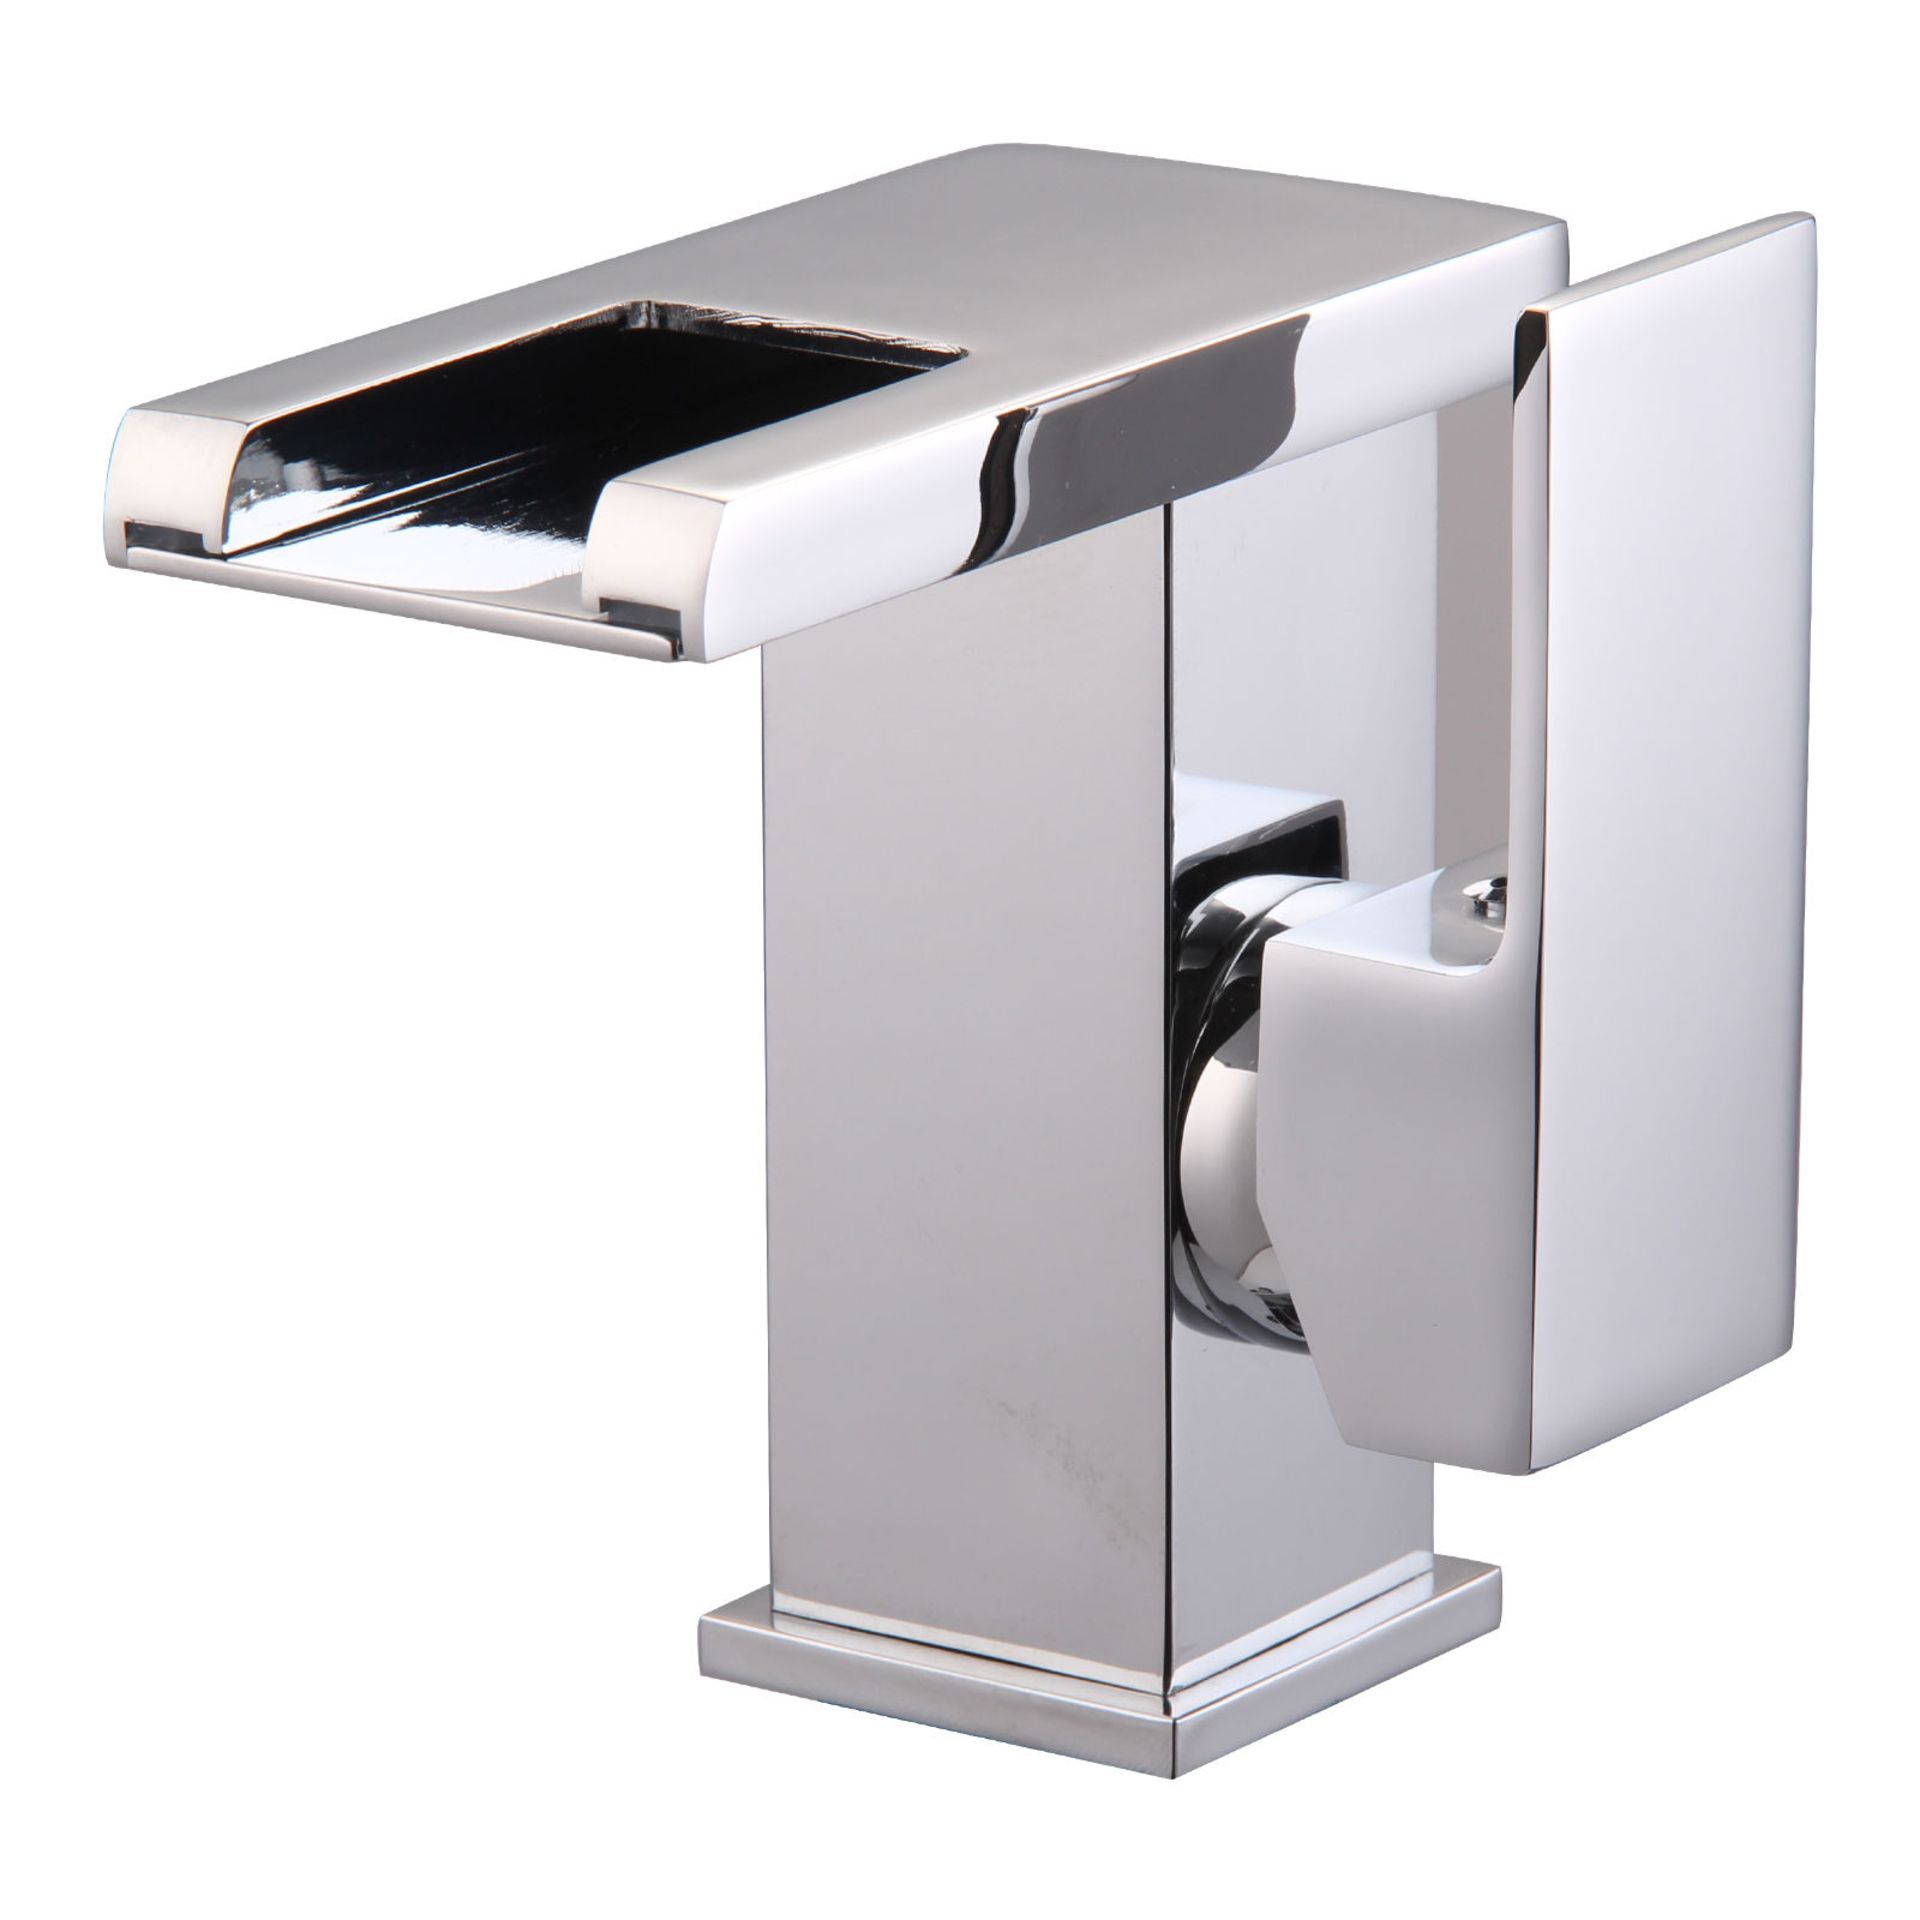 New Led Waterfall Bathroom Basin Mixer Tap. RRP £229.99.Easy To Install And Clean. All Copper... - Image 2 of 2